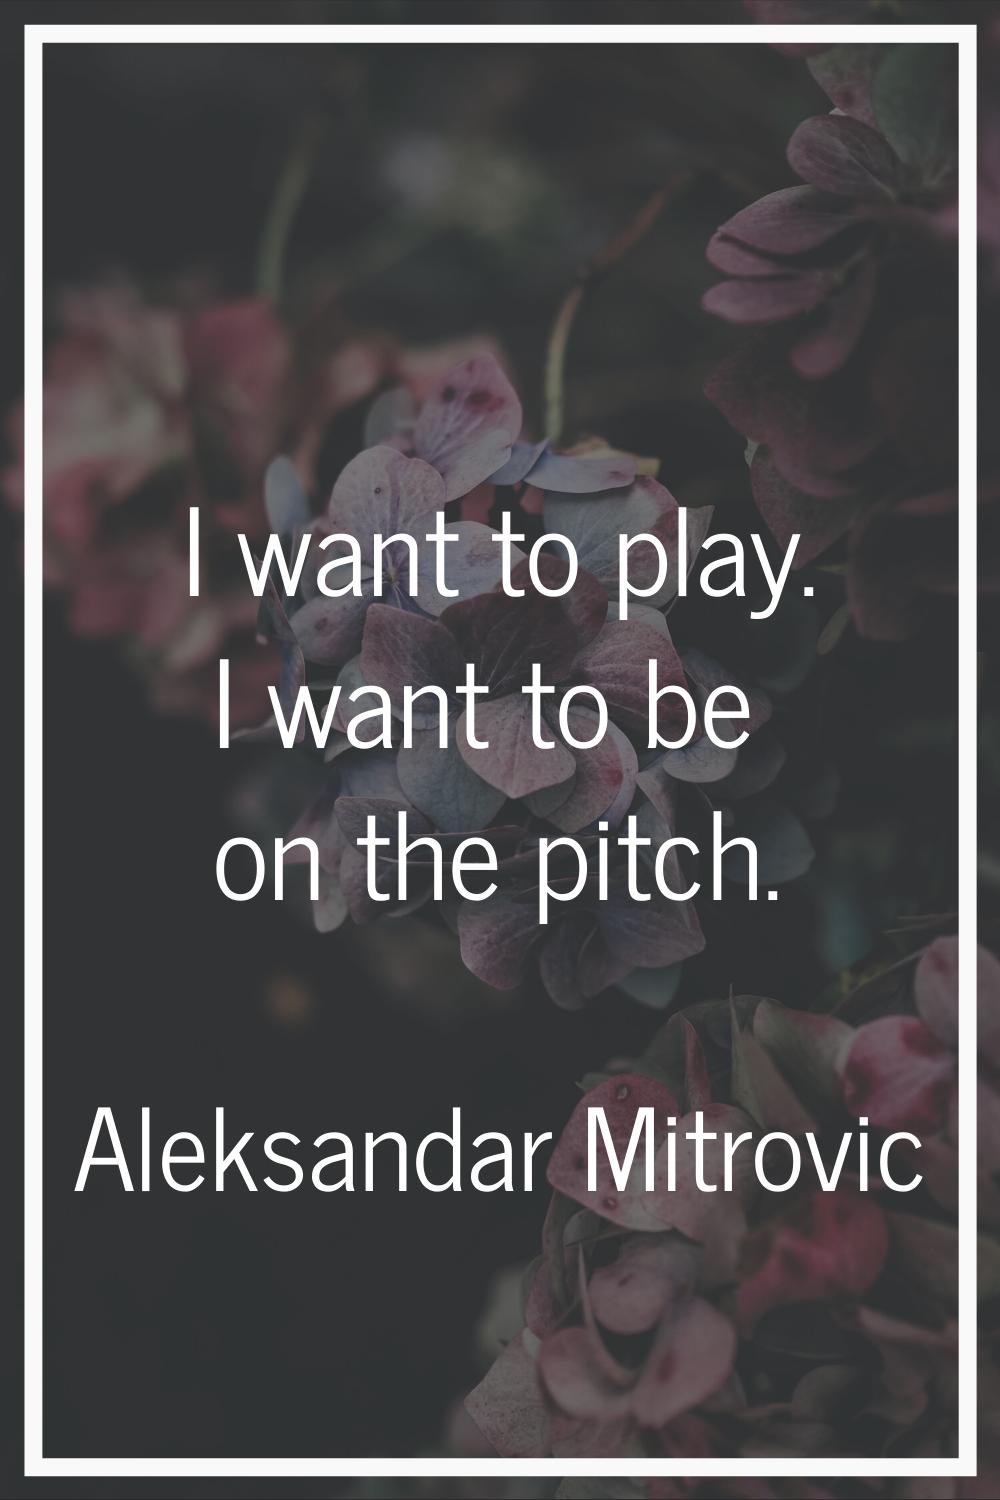 I want to play. I want to be on the pitch.